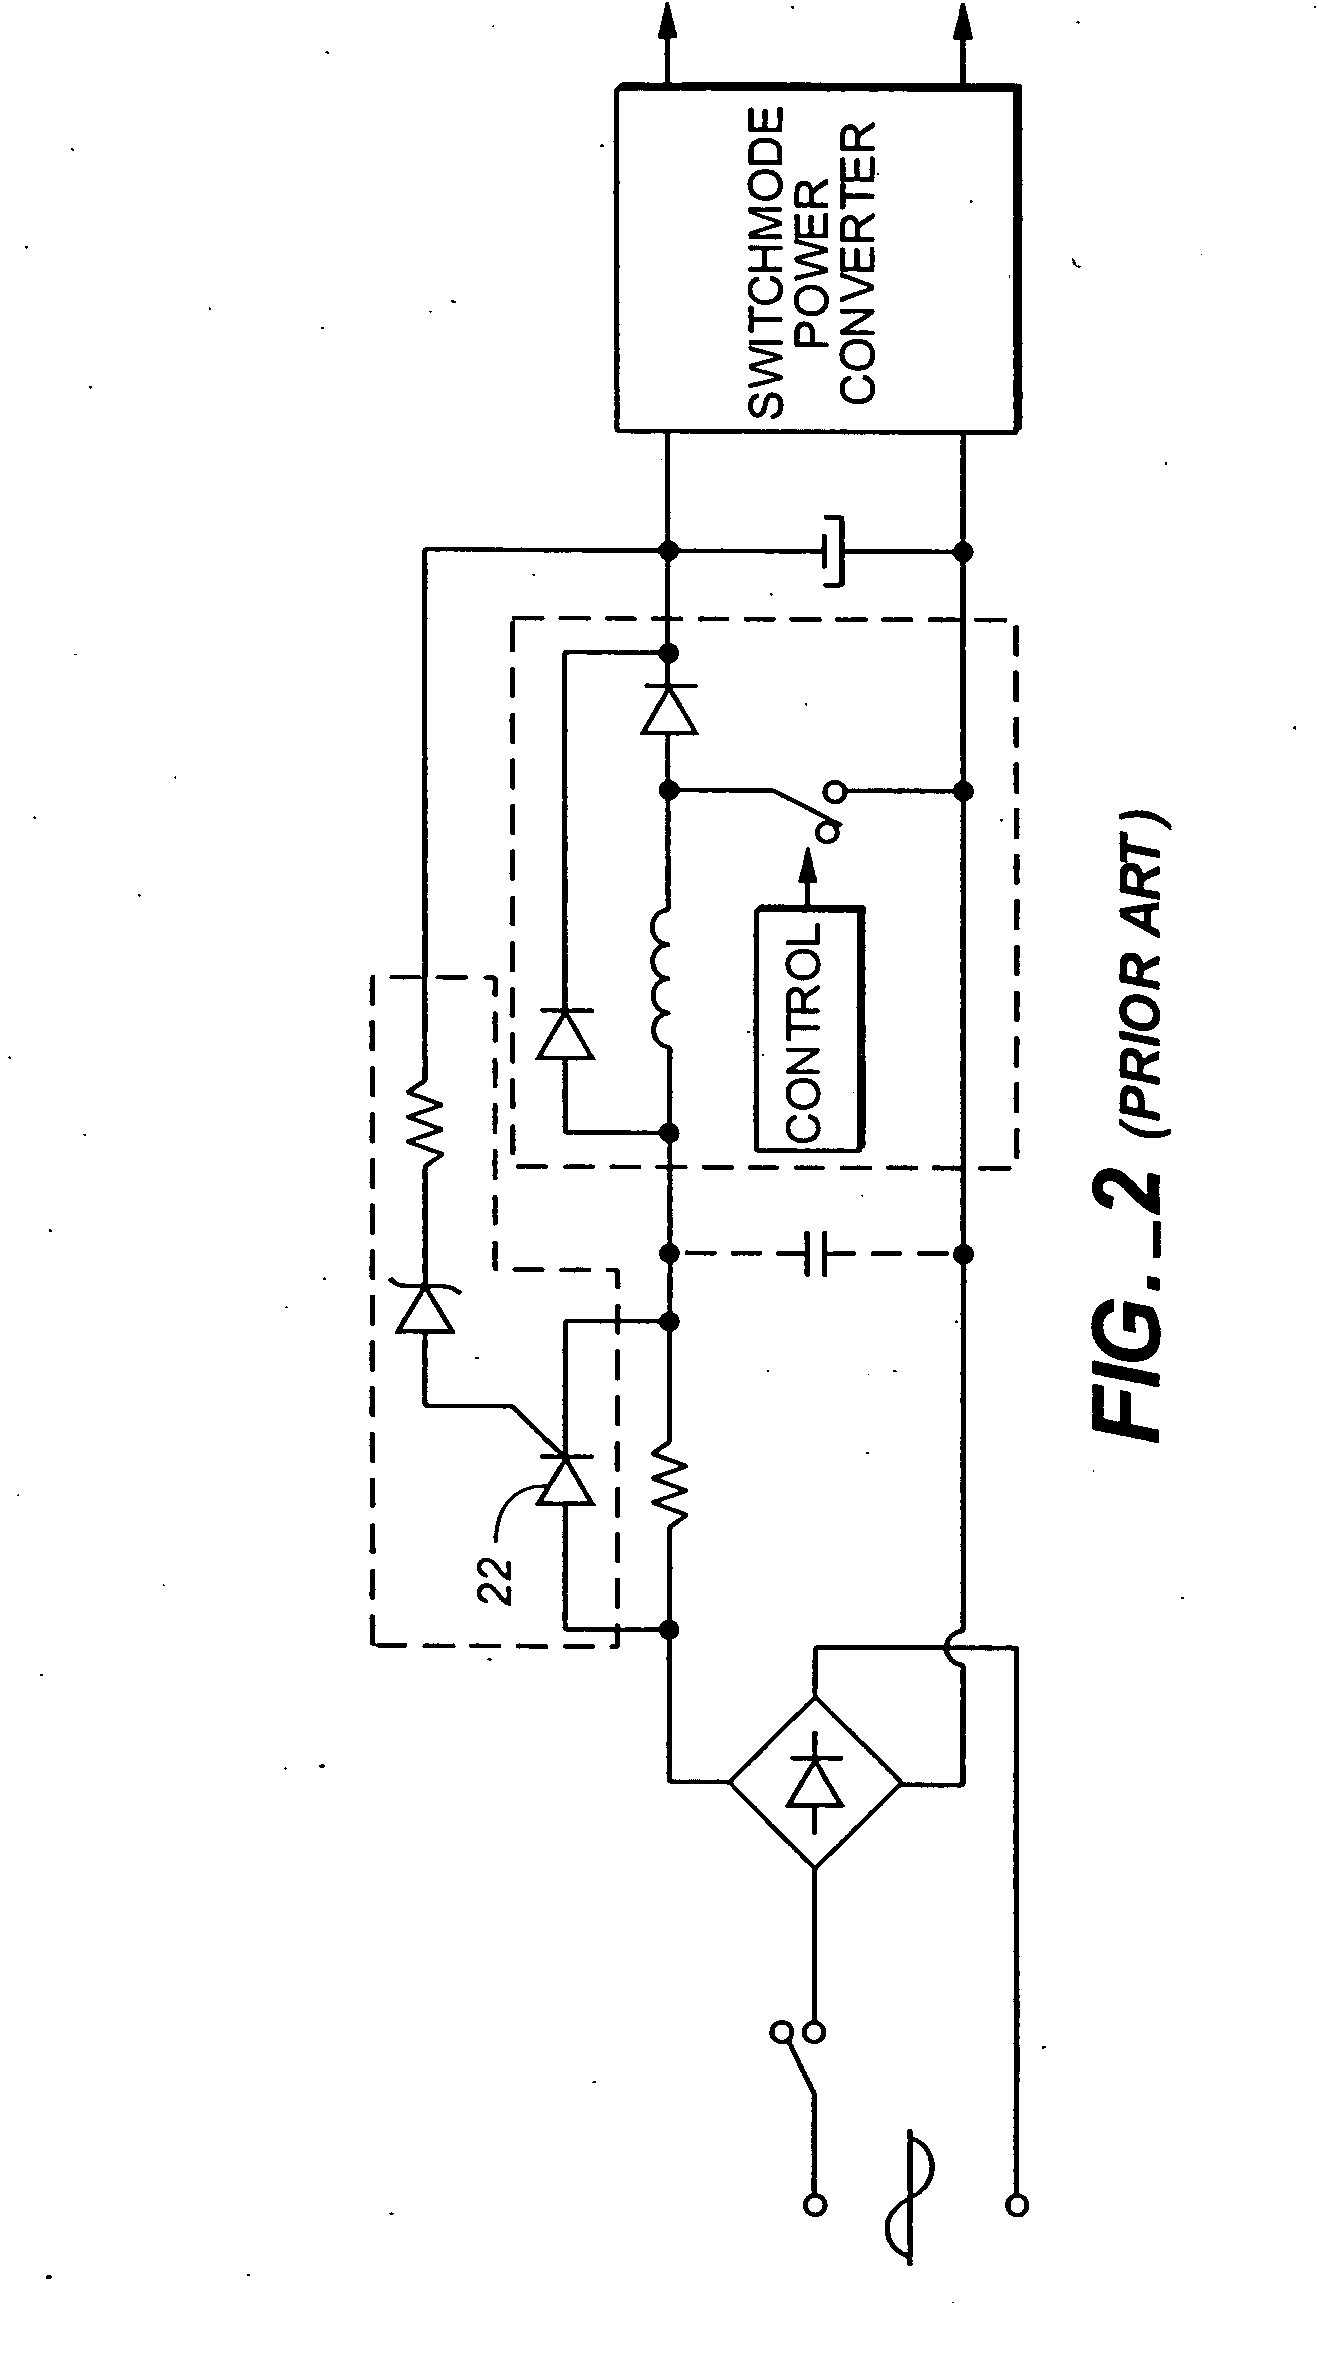 Active inrush current control using a relay for AC to DC converters